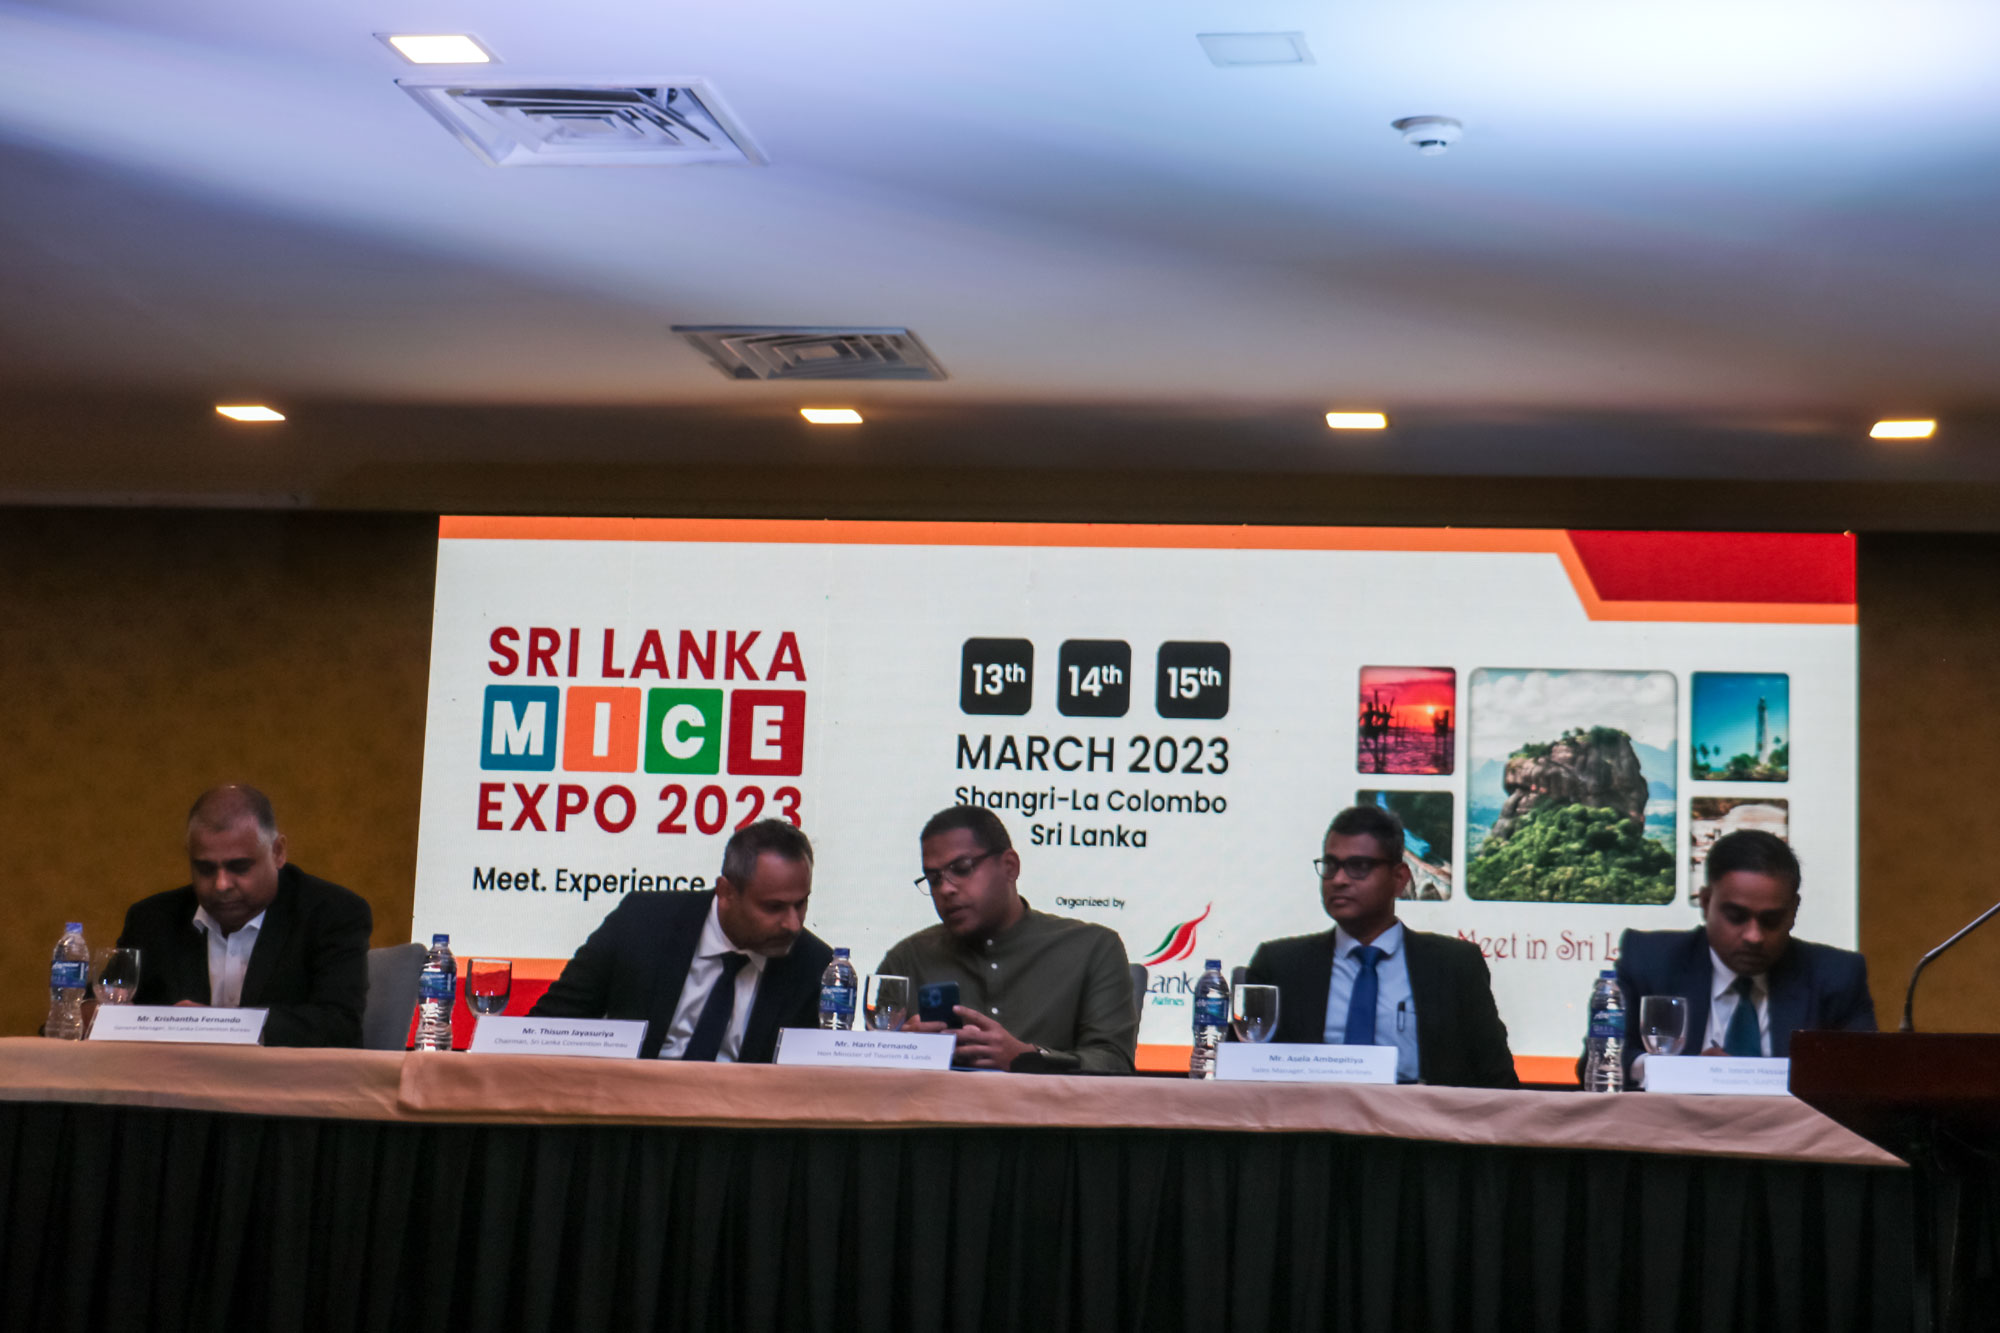 Targetting Asia, Middle East & Europe, Sri Lanka launches MICE Expo 2023